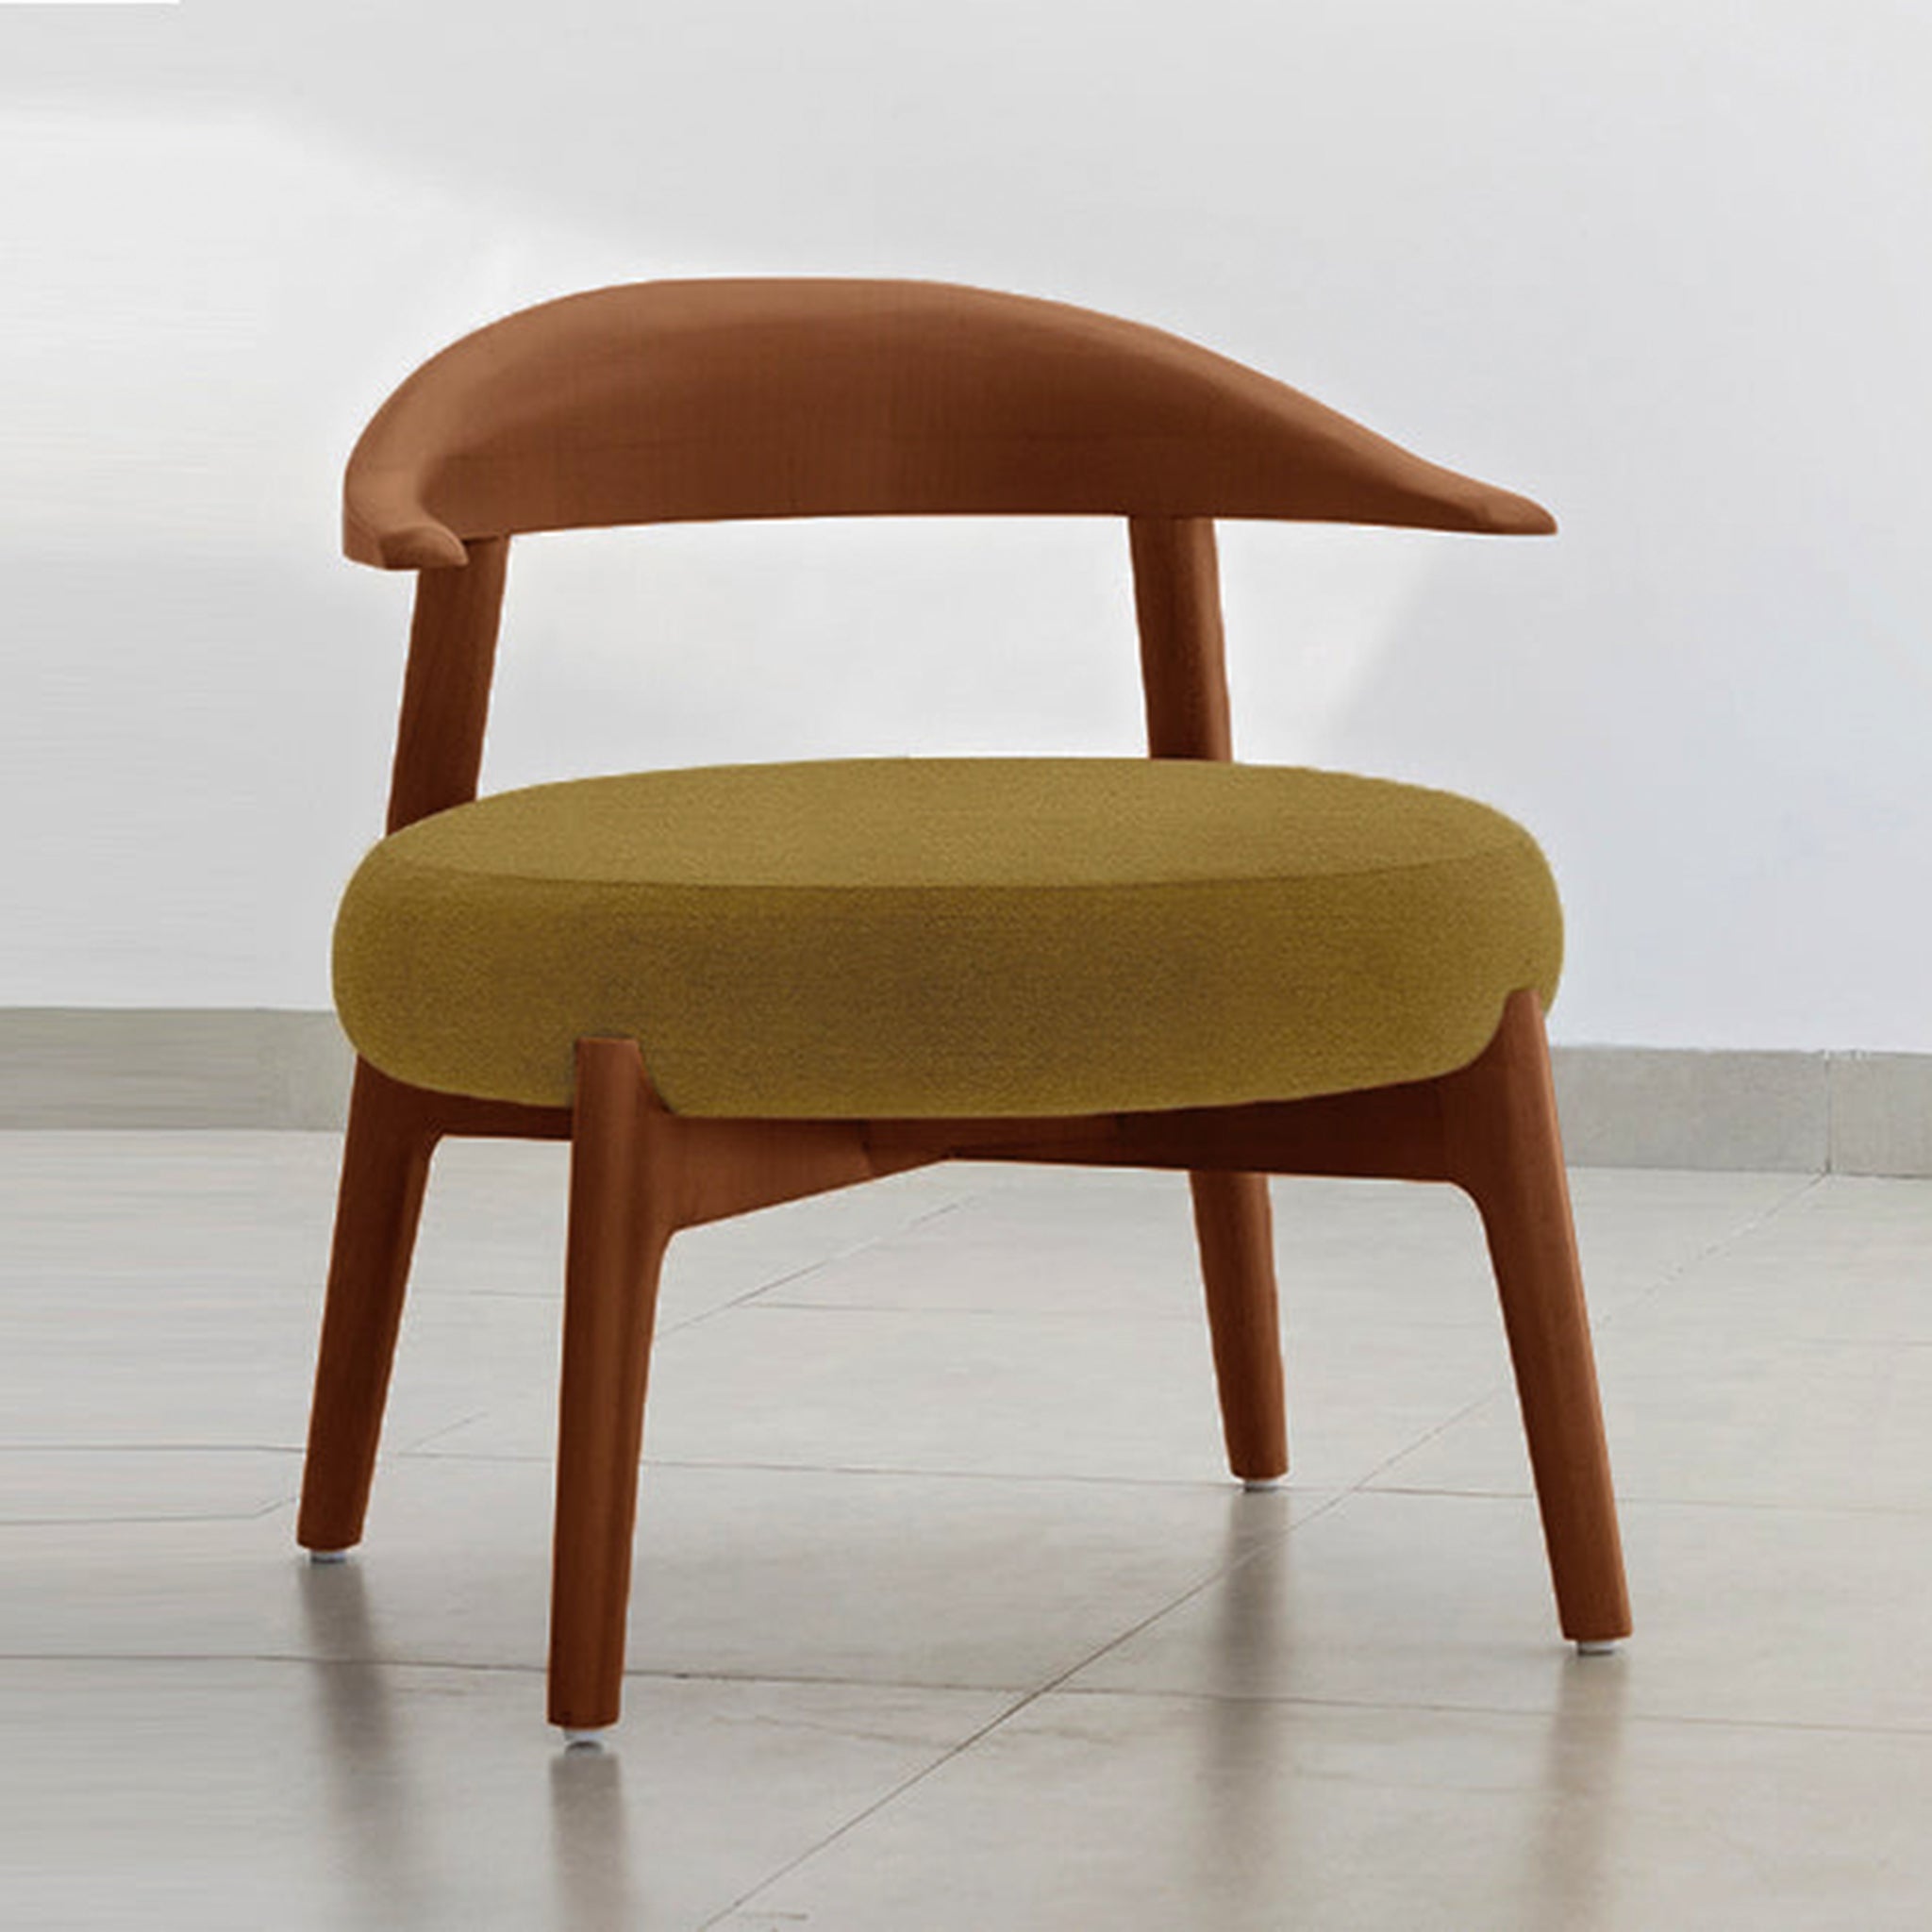 "The Hyde Accent Chair with a sleek wooden frame and comfortable upholstery"